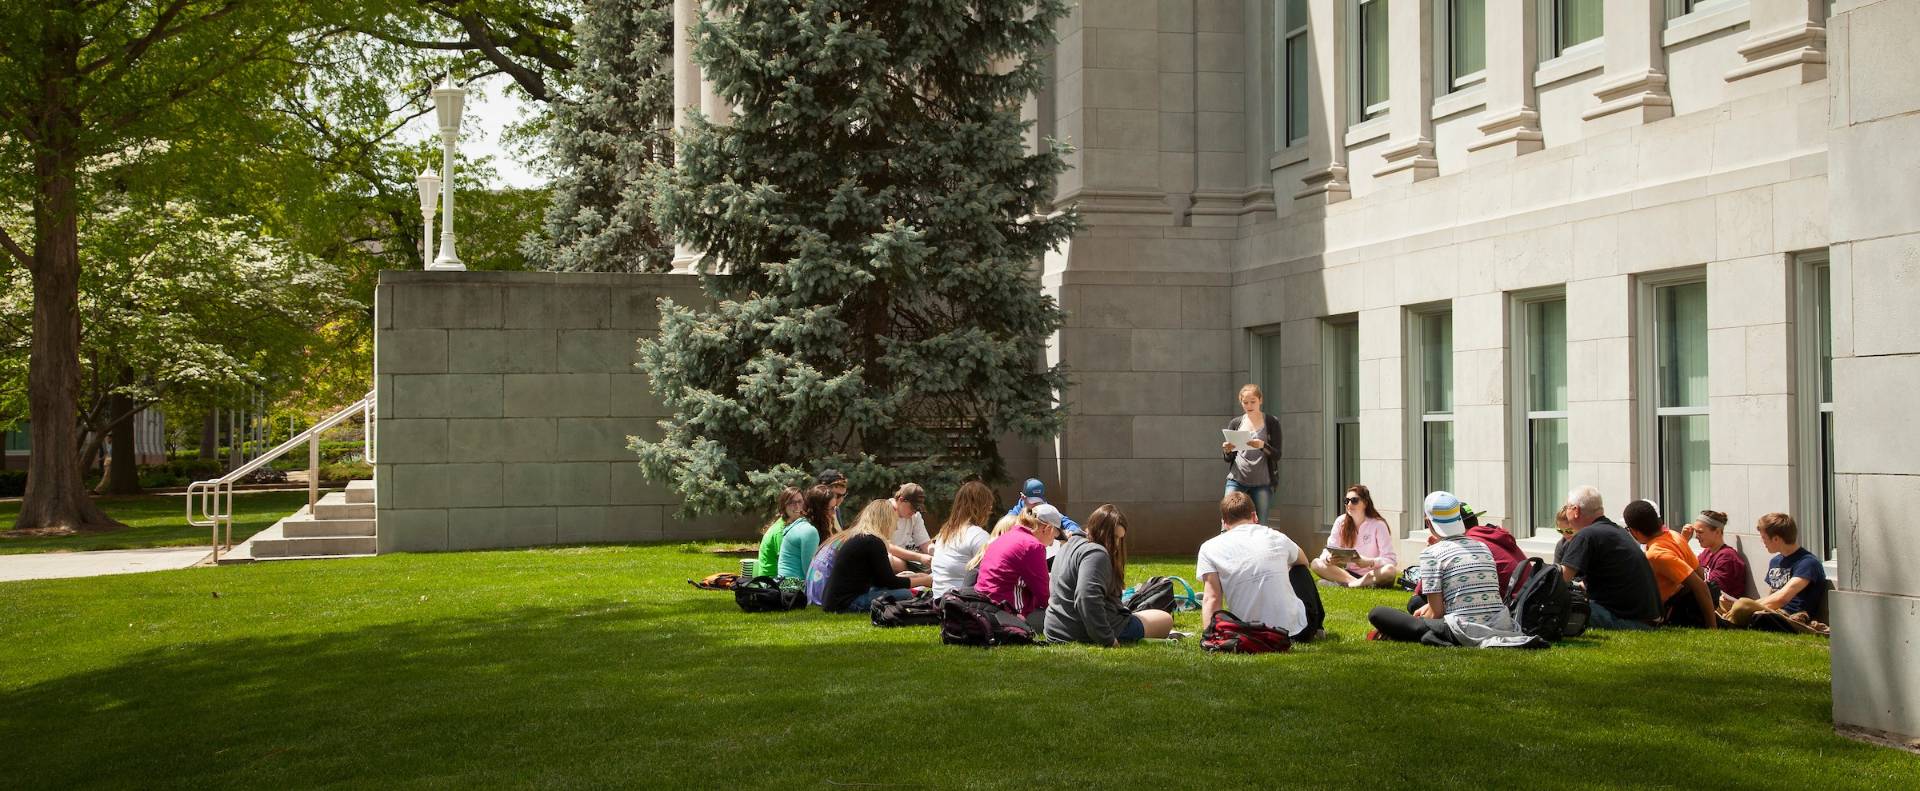 Group of students sit outside of neoclassical building for class.